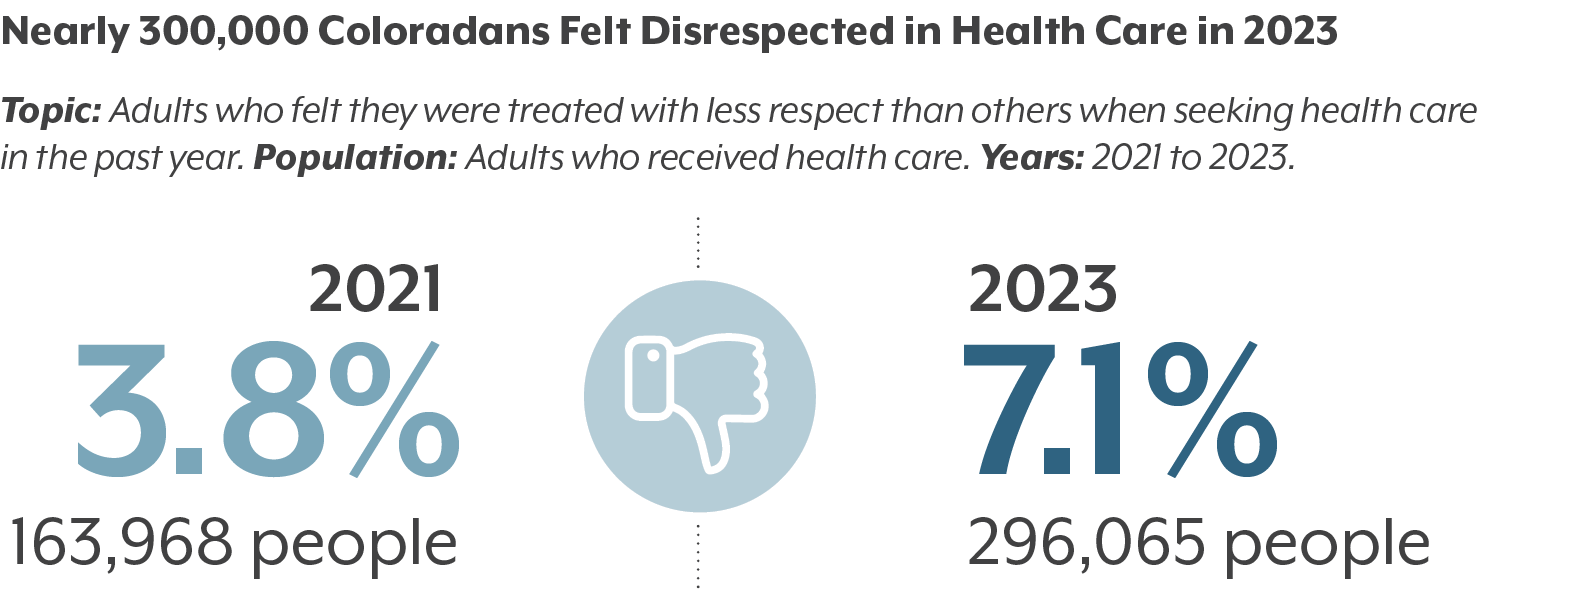 Graphic showing 3.8% of Coloradans felt disrespected when seeking health care in 2021, and 7.1% in 2023